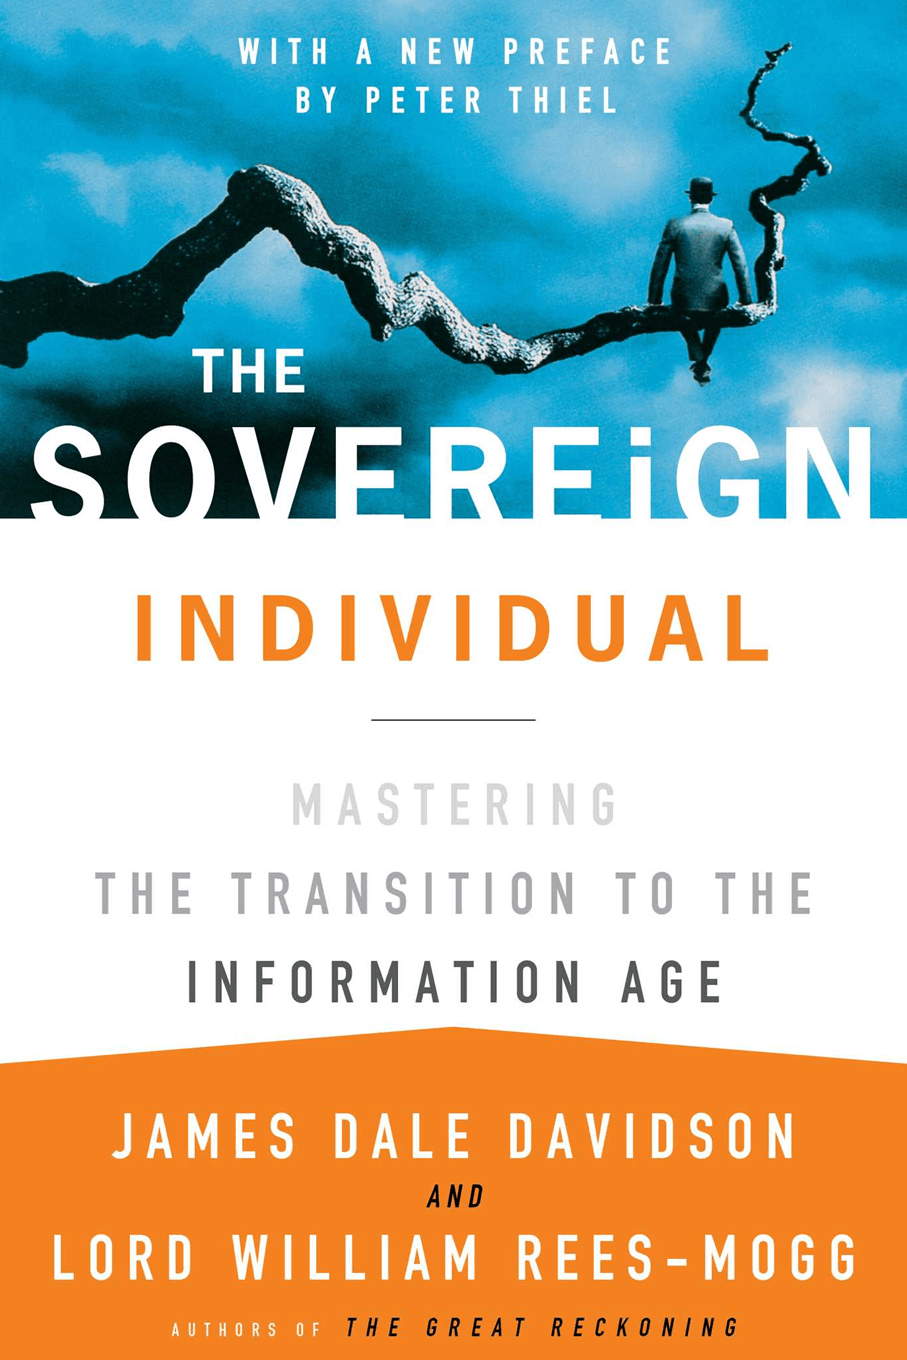 The Sovereign Individual by James Dale Davidson